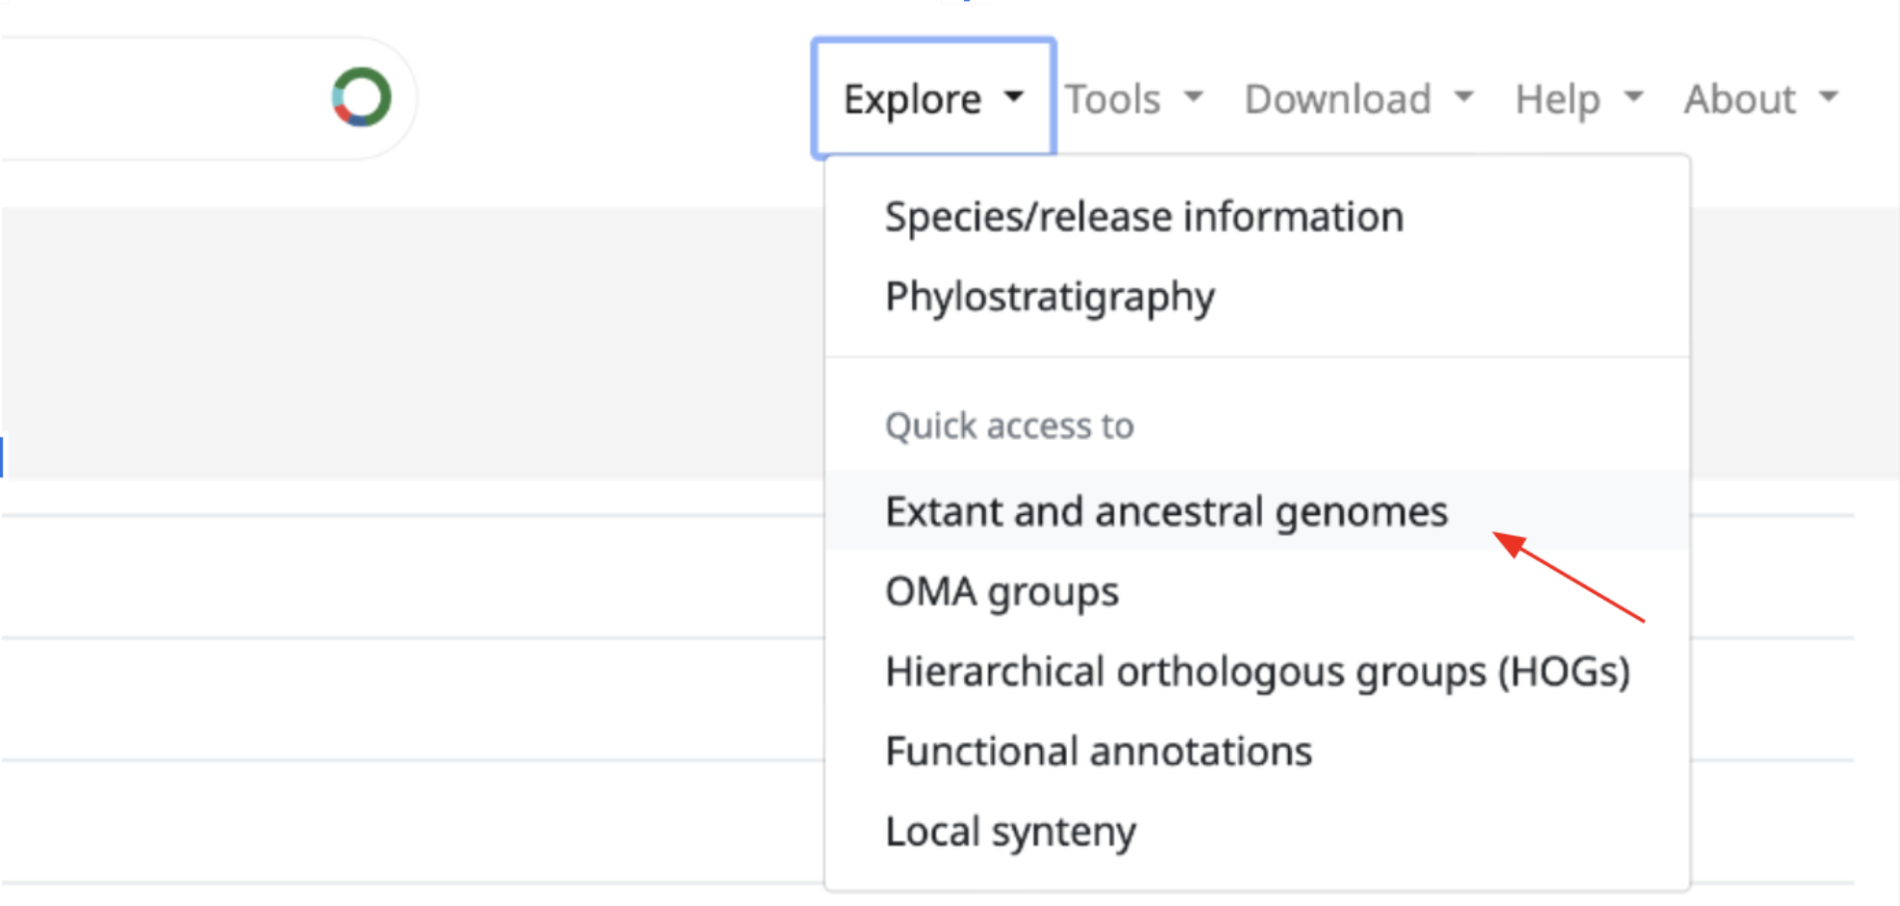 Explore > Extant and ancestral genomes